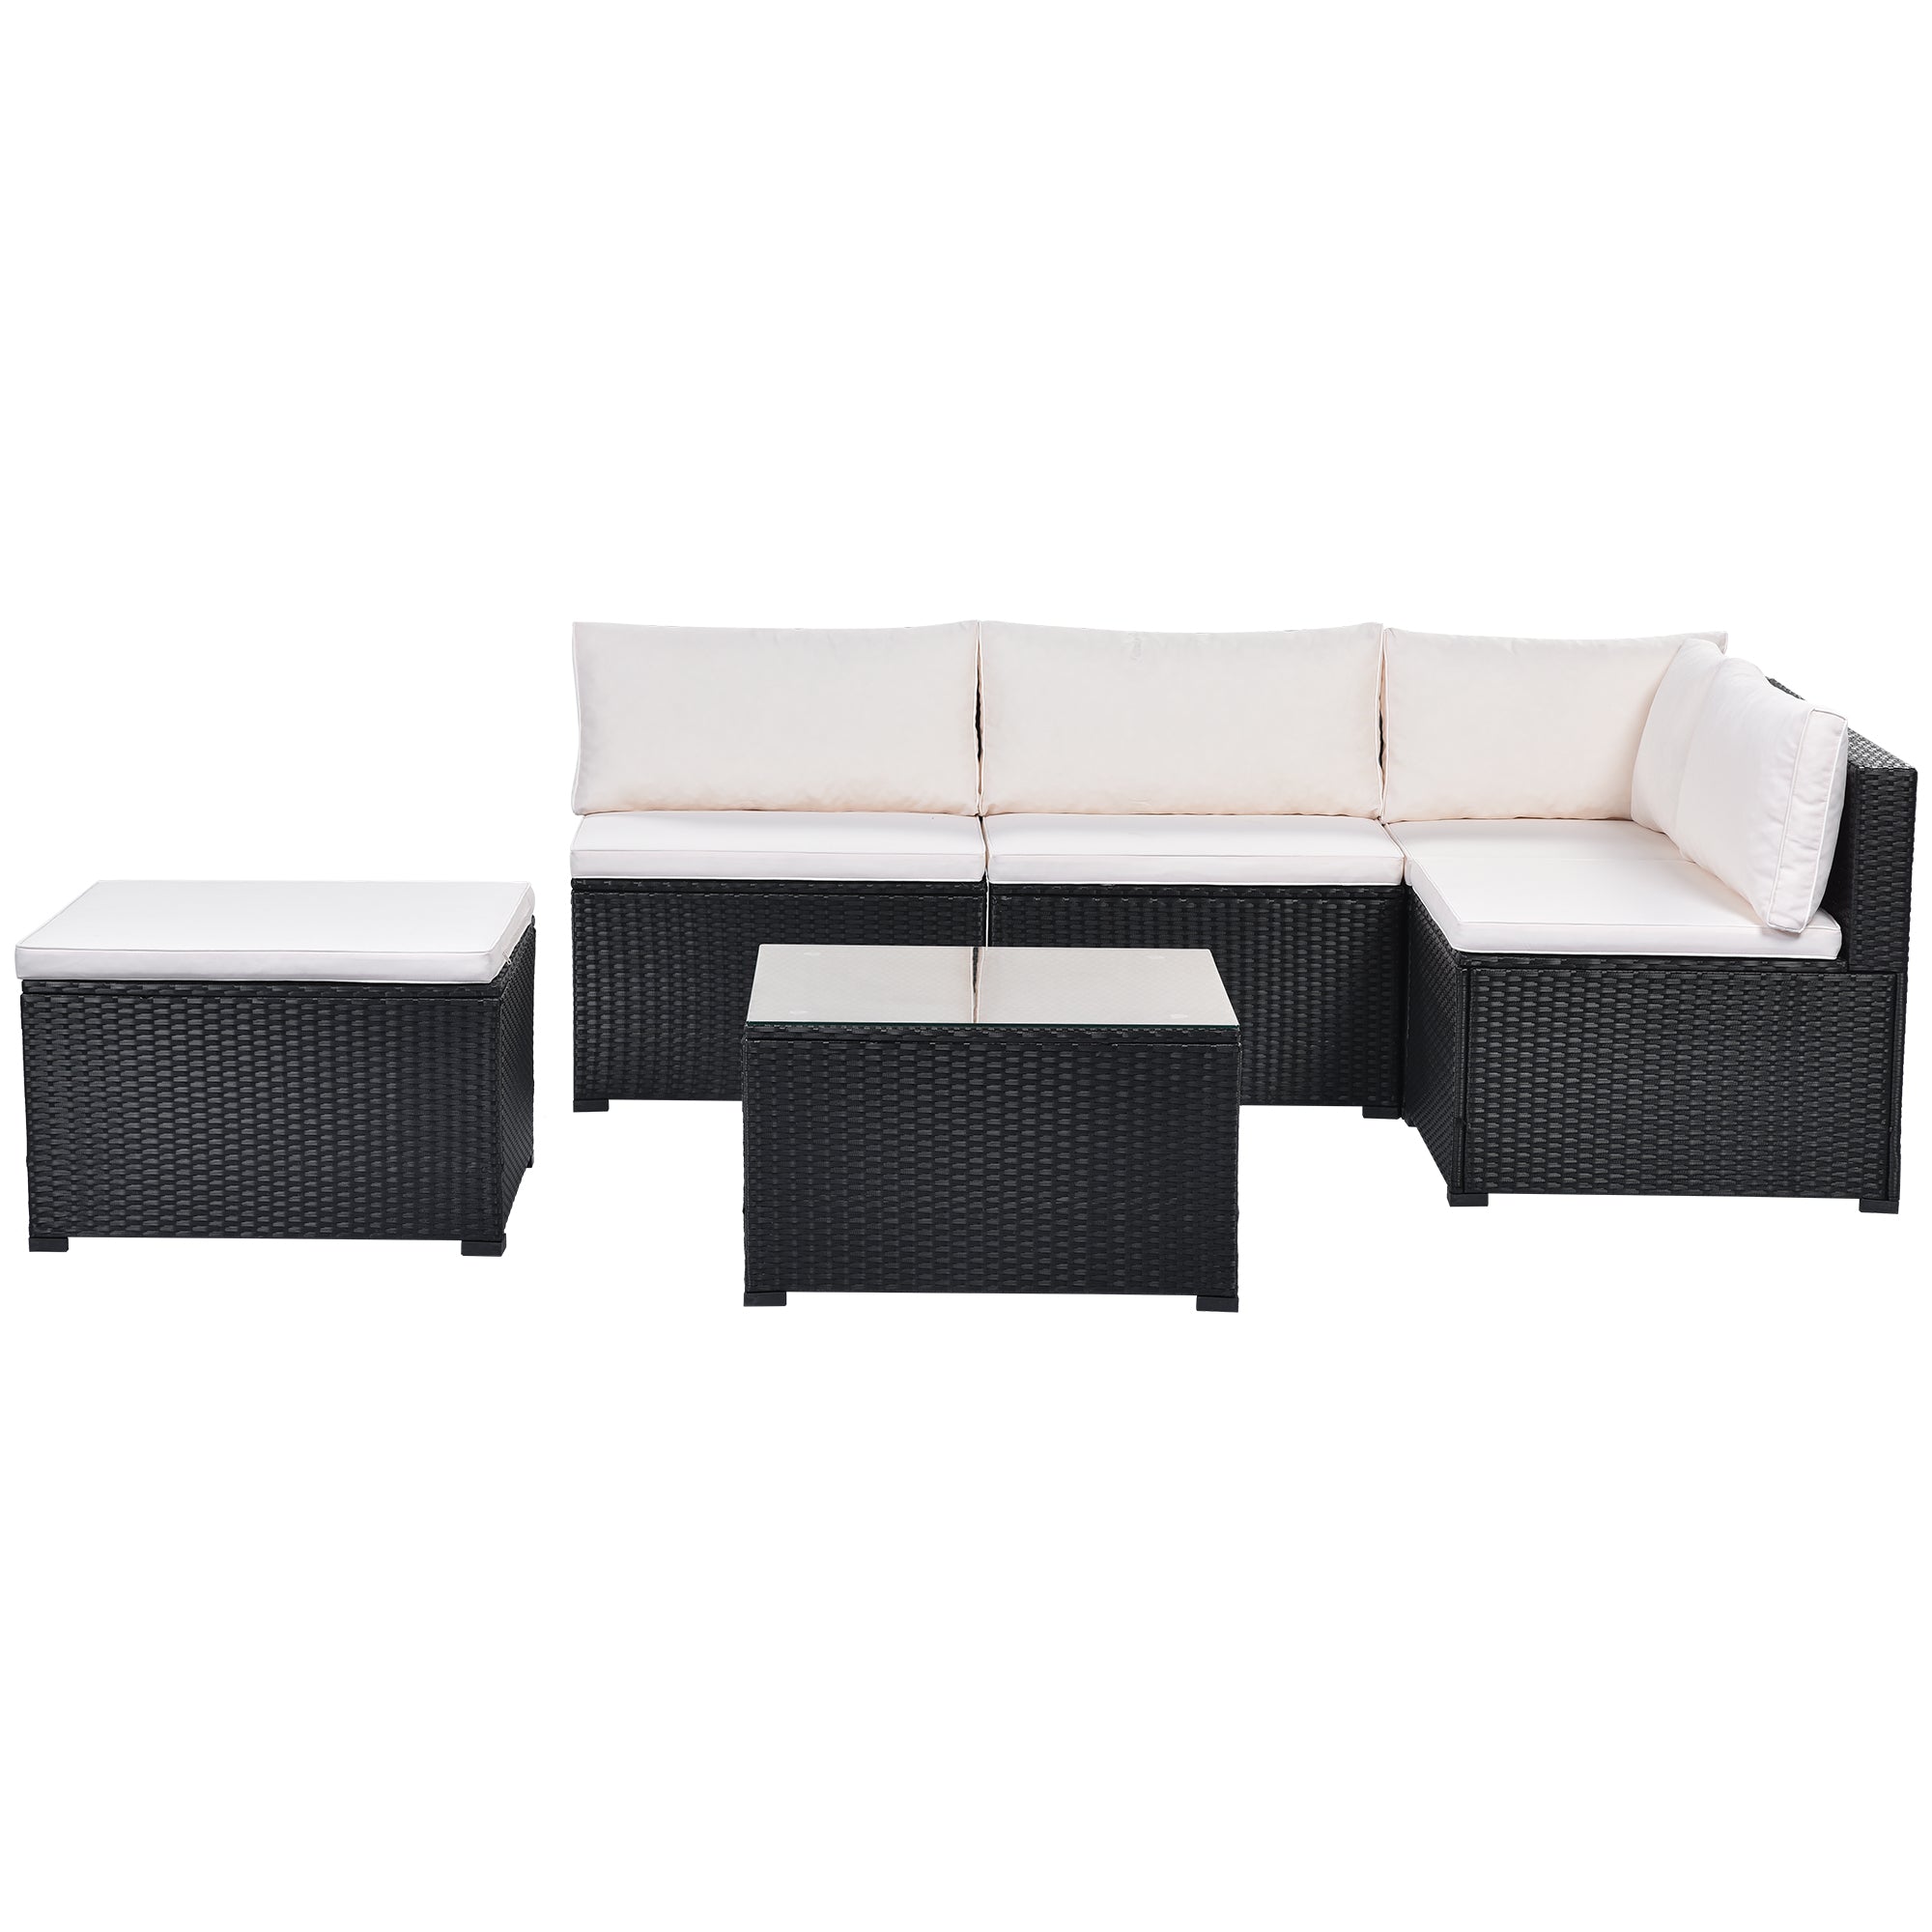 6-Piece Outdoor Furniture Set with PE Rattan Wicker, Patio Garden Sectional Sofa Chair, removable cushions (Black wicker, Grey cushion)-Boyel Living